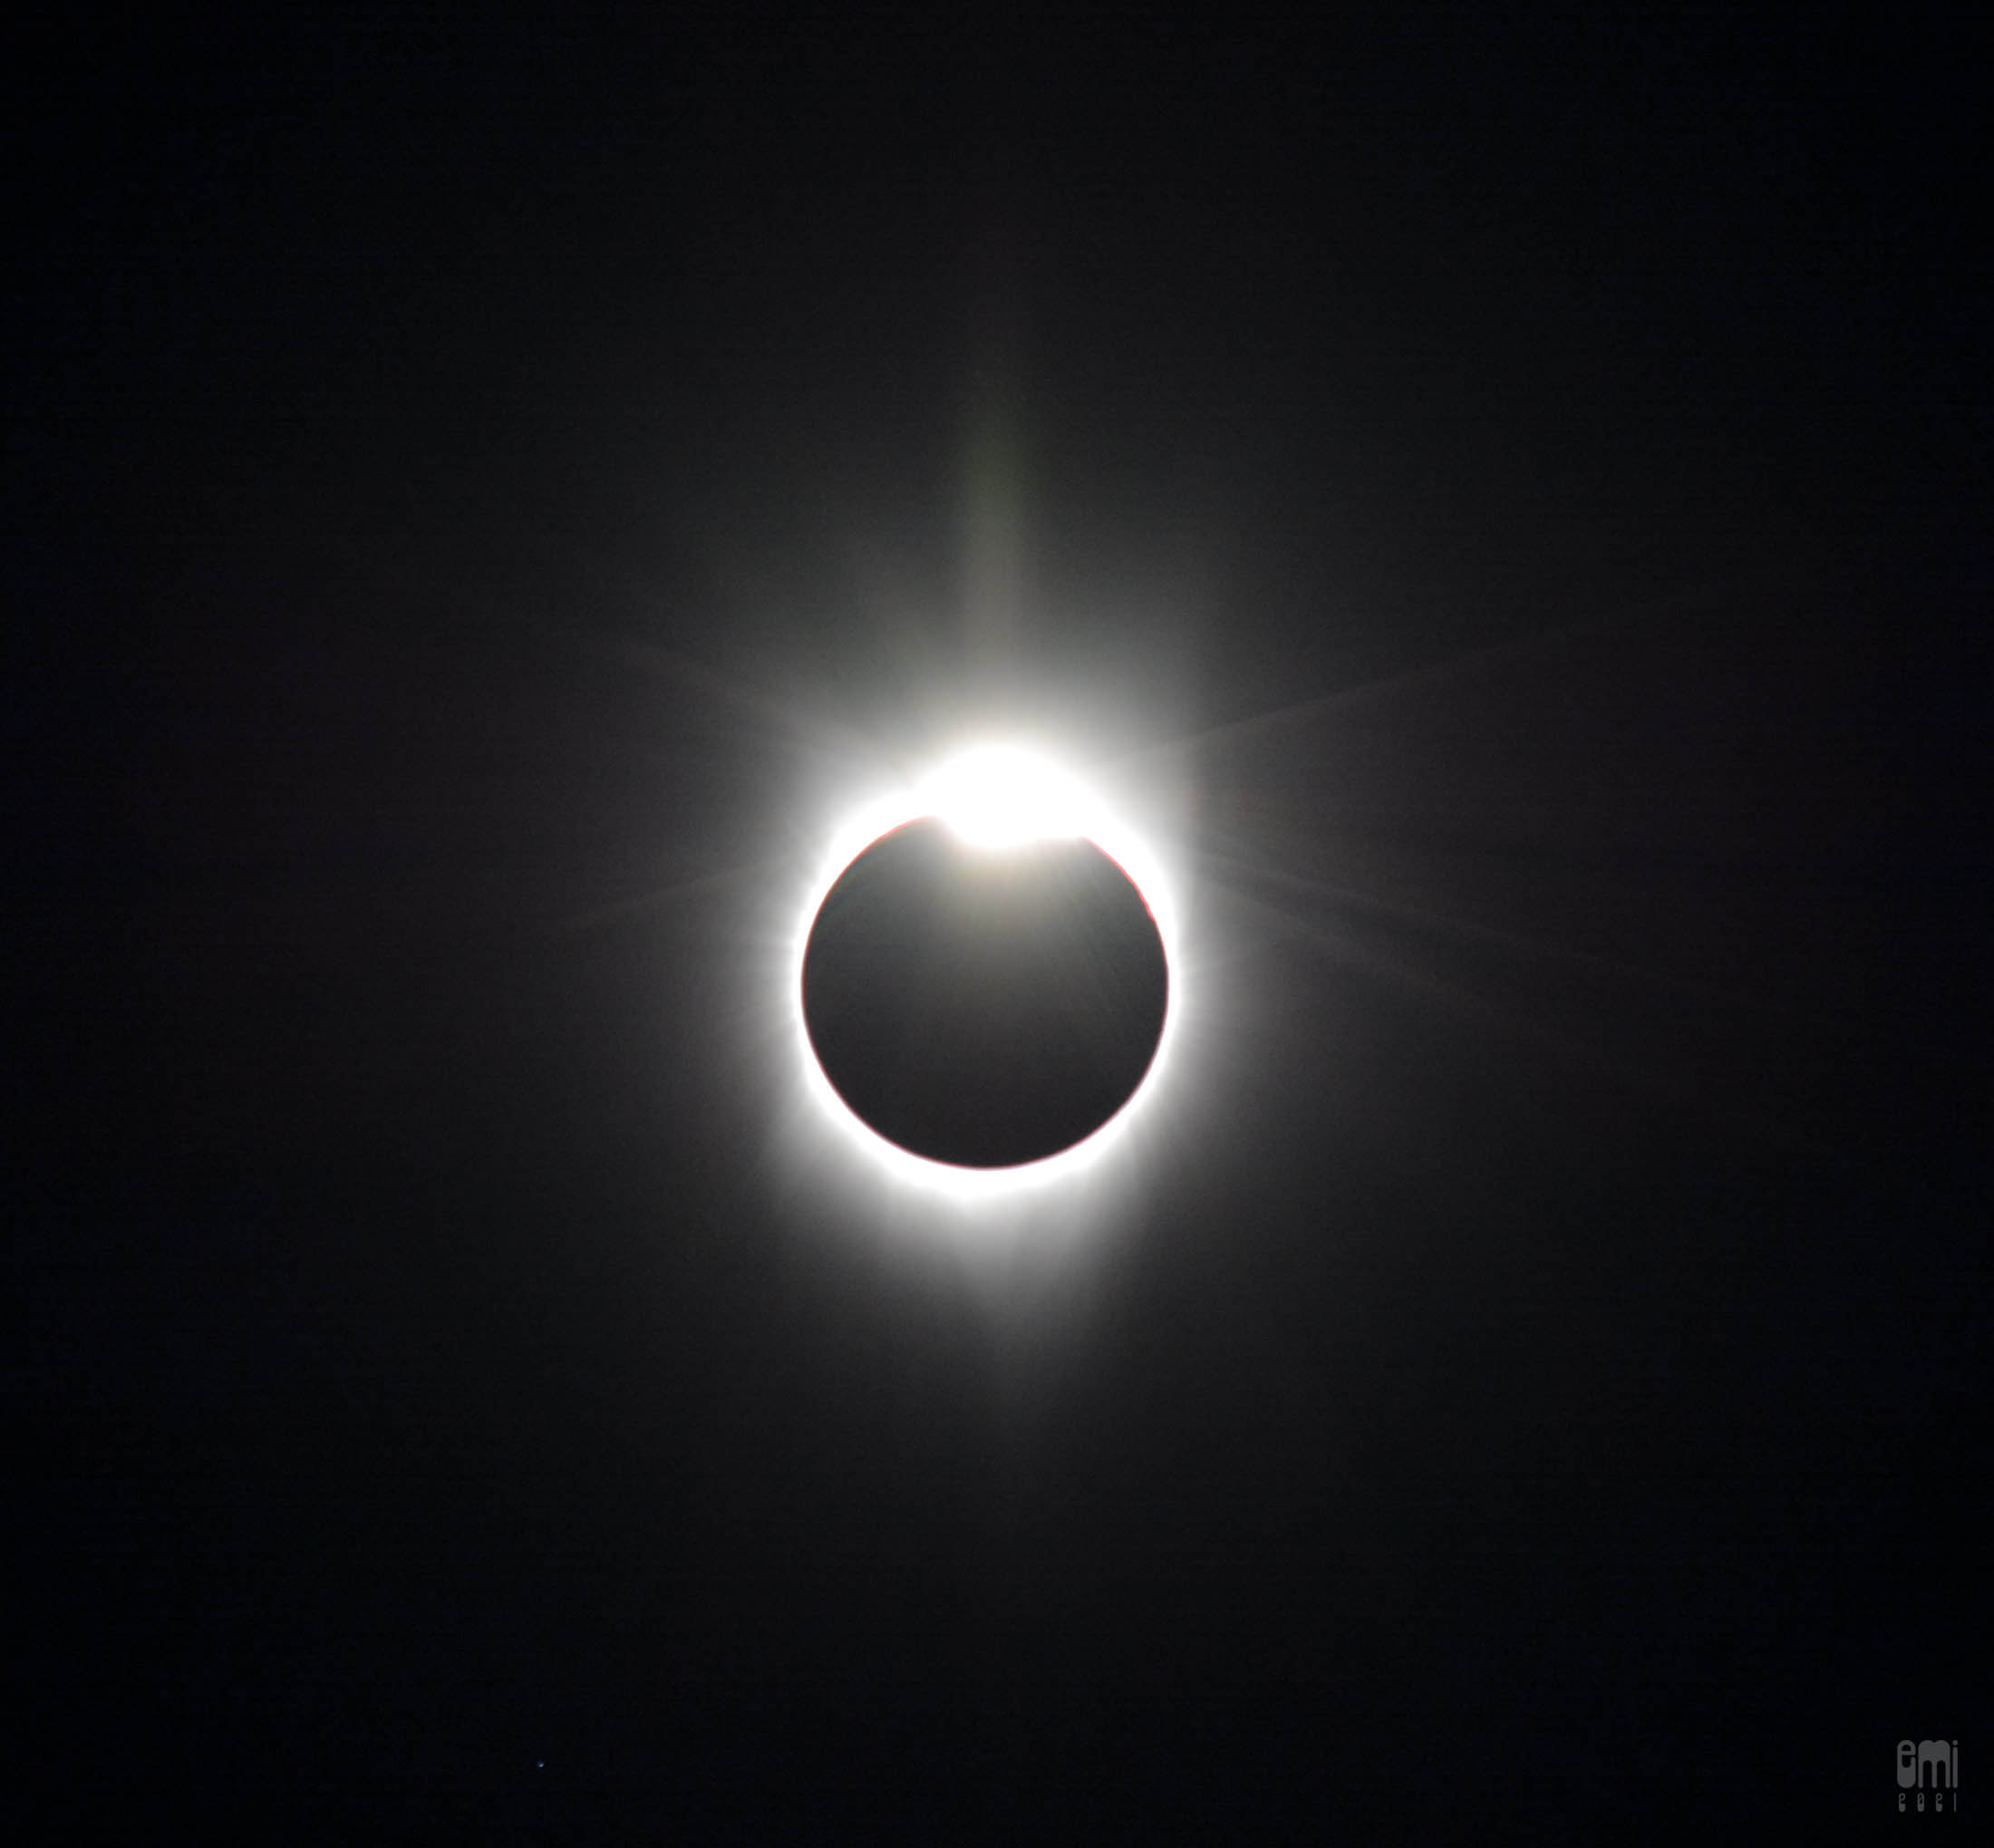 20170821 Total Solar Eclipse Diamond Ring at Painted Hills, Oregon, photo by Kaishi Ito, Nikon D7100 with 300mm Lens